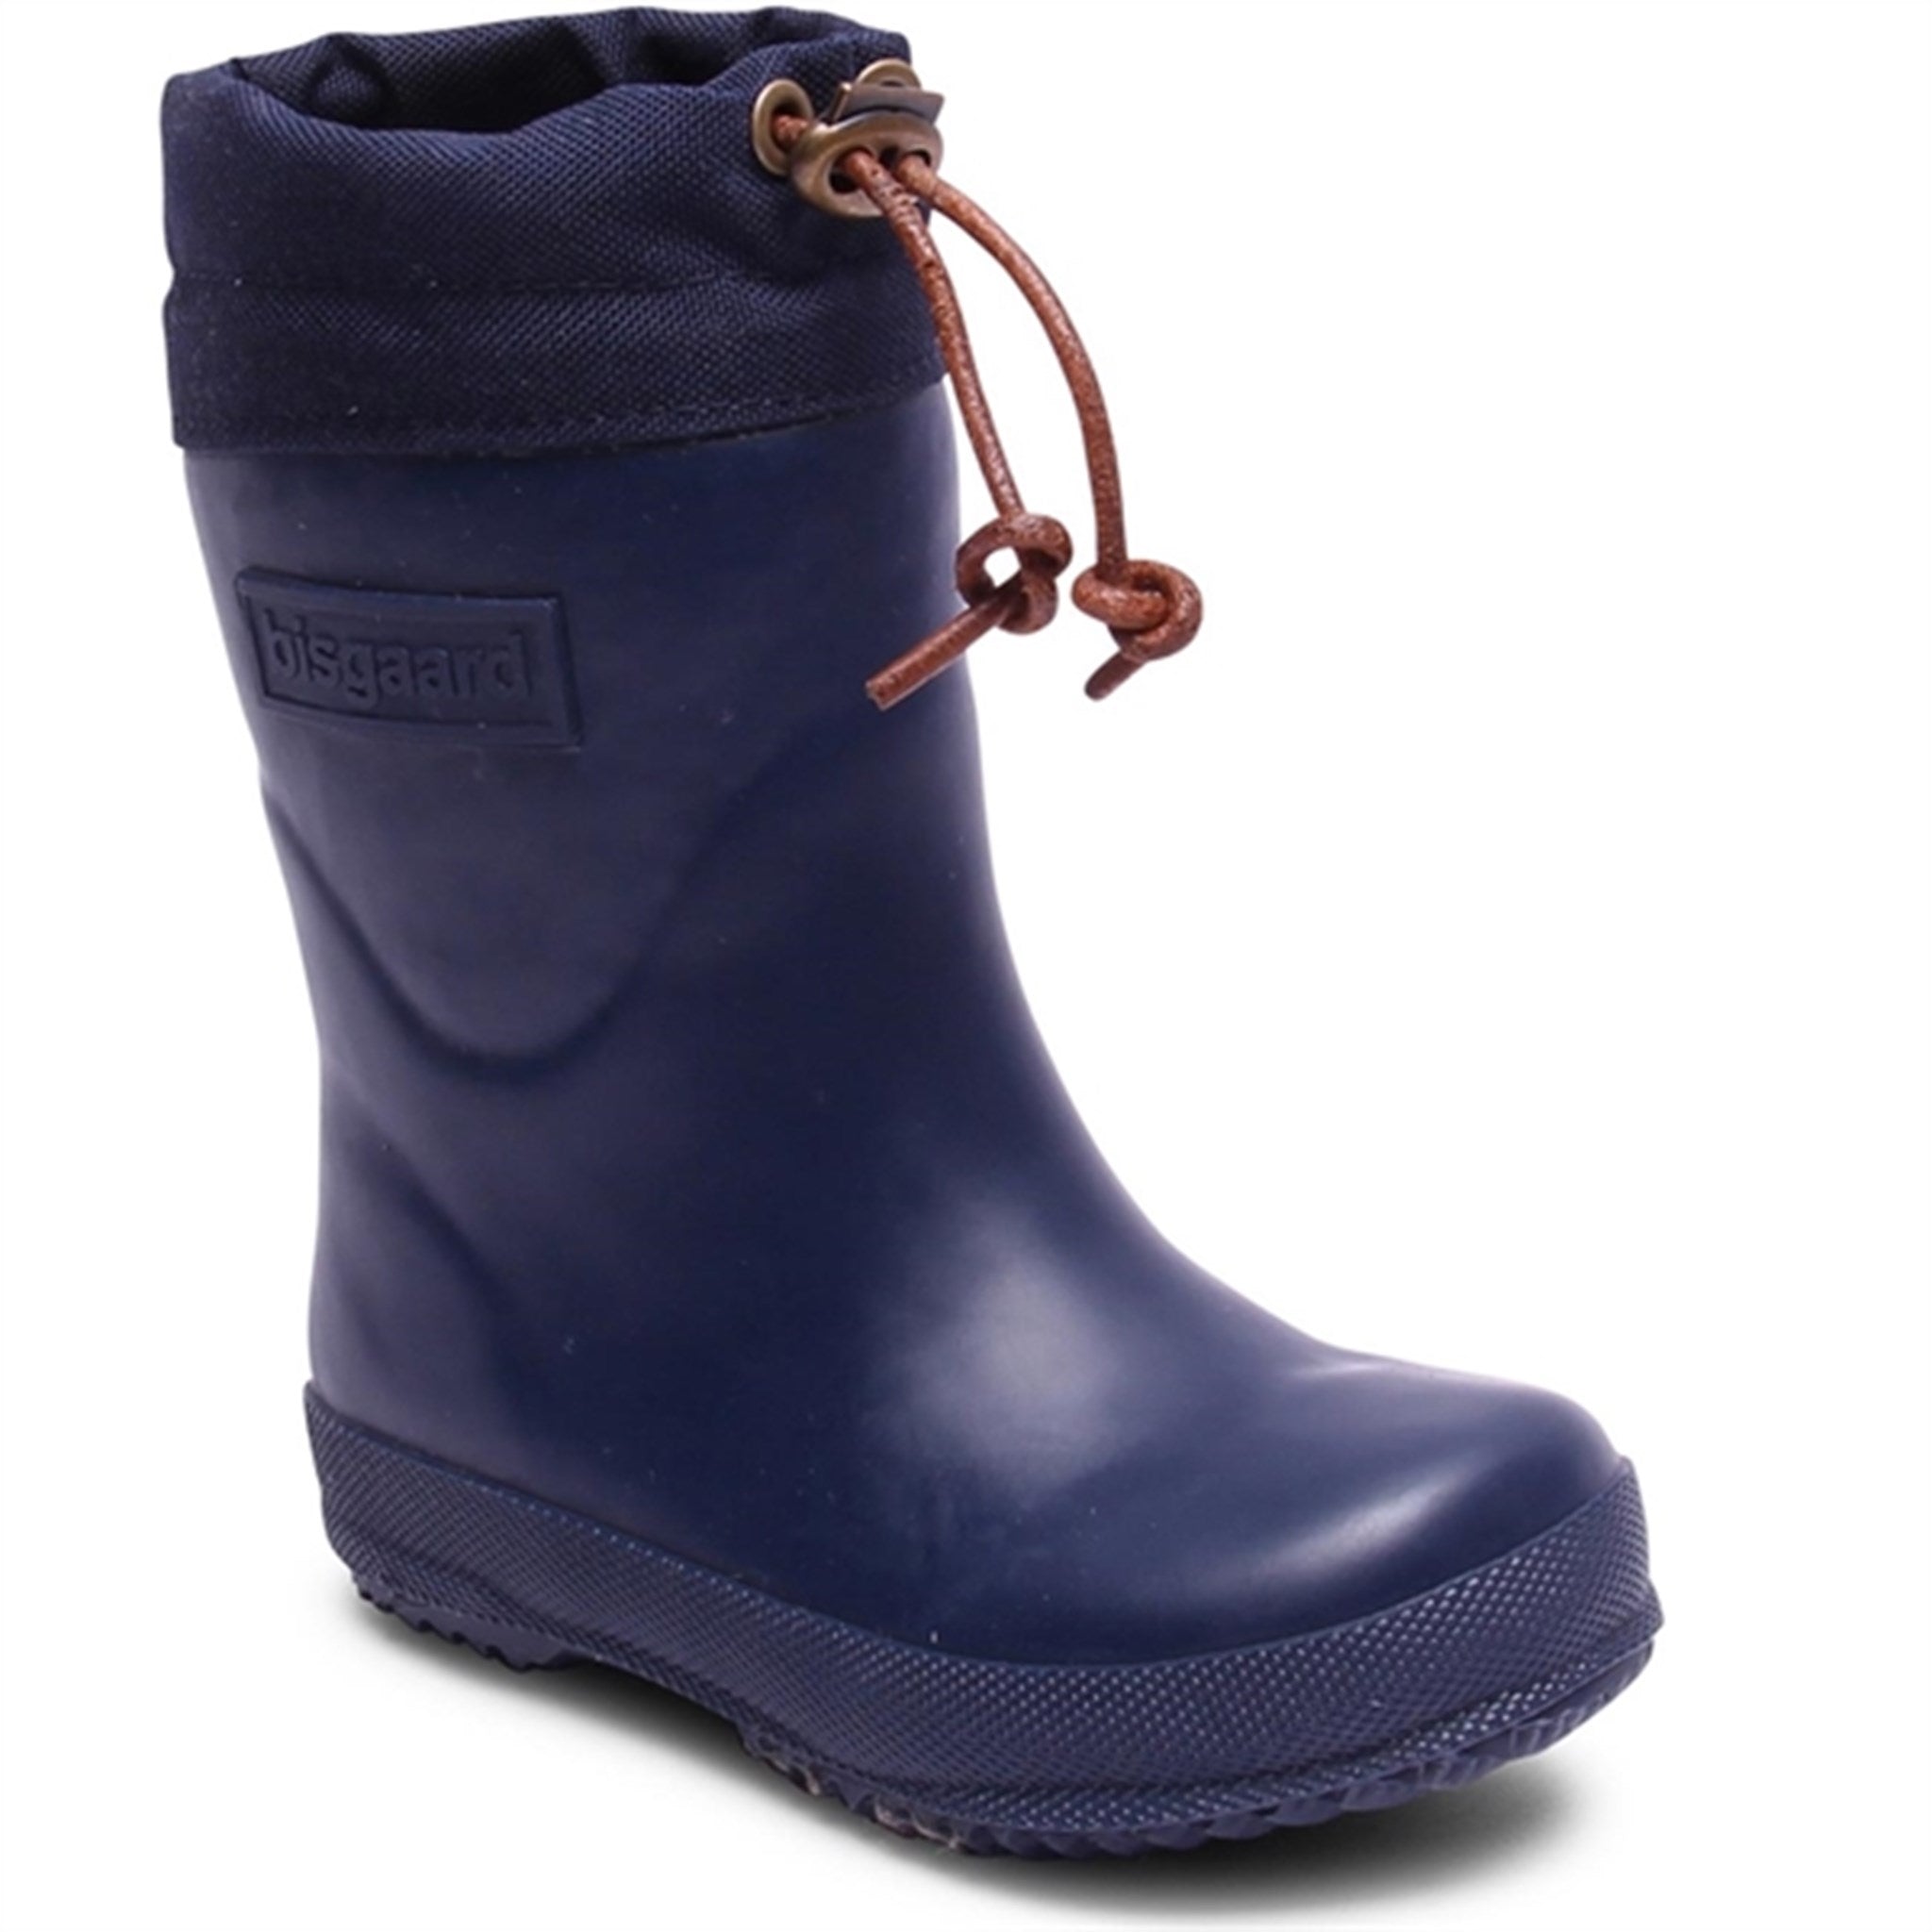 Bisgaard Winter Thermo Rubber Boots Blue